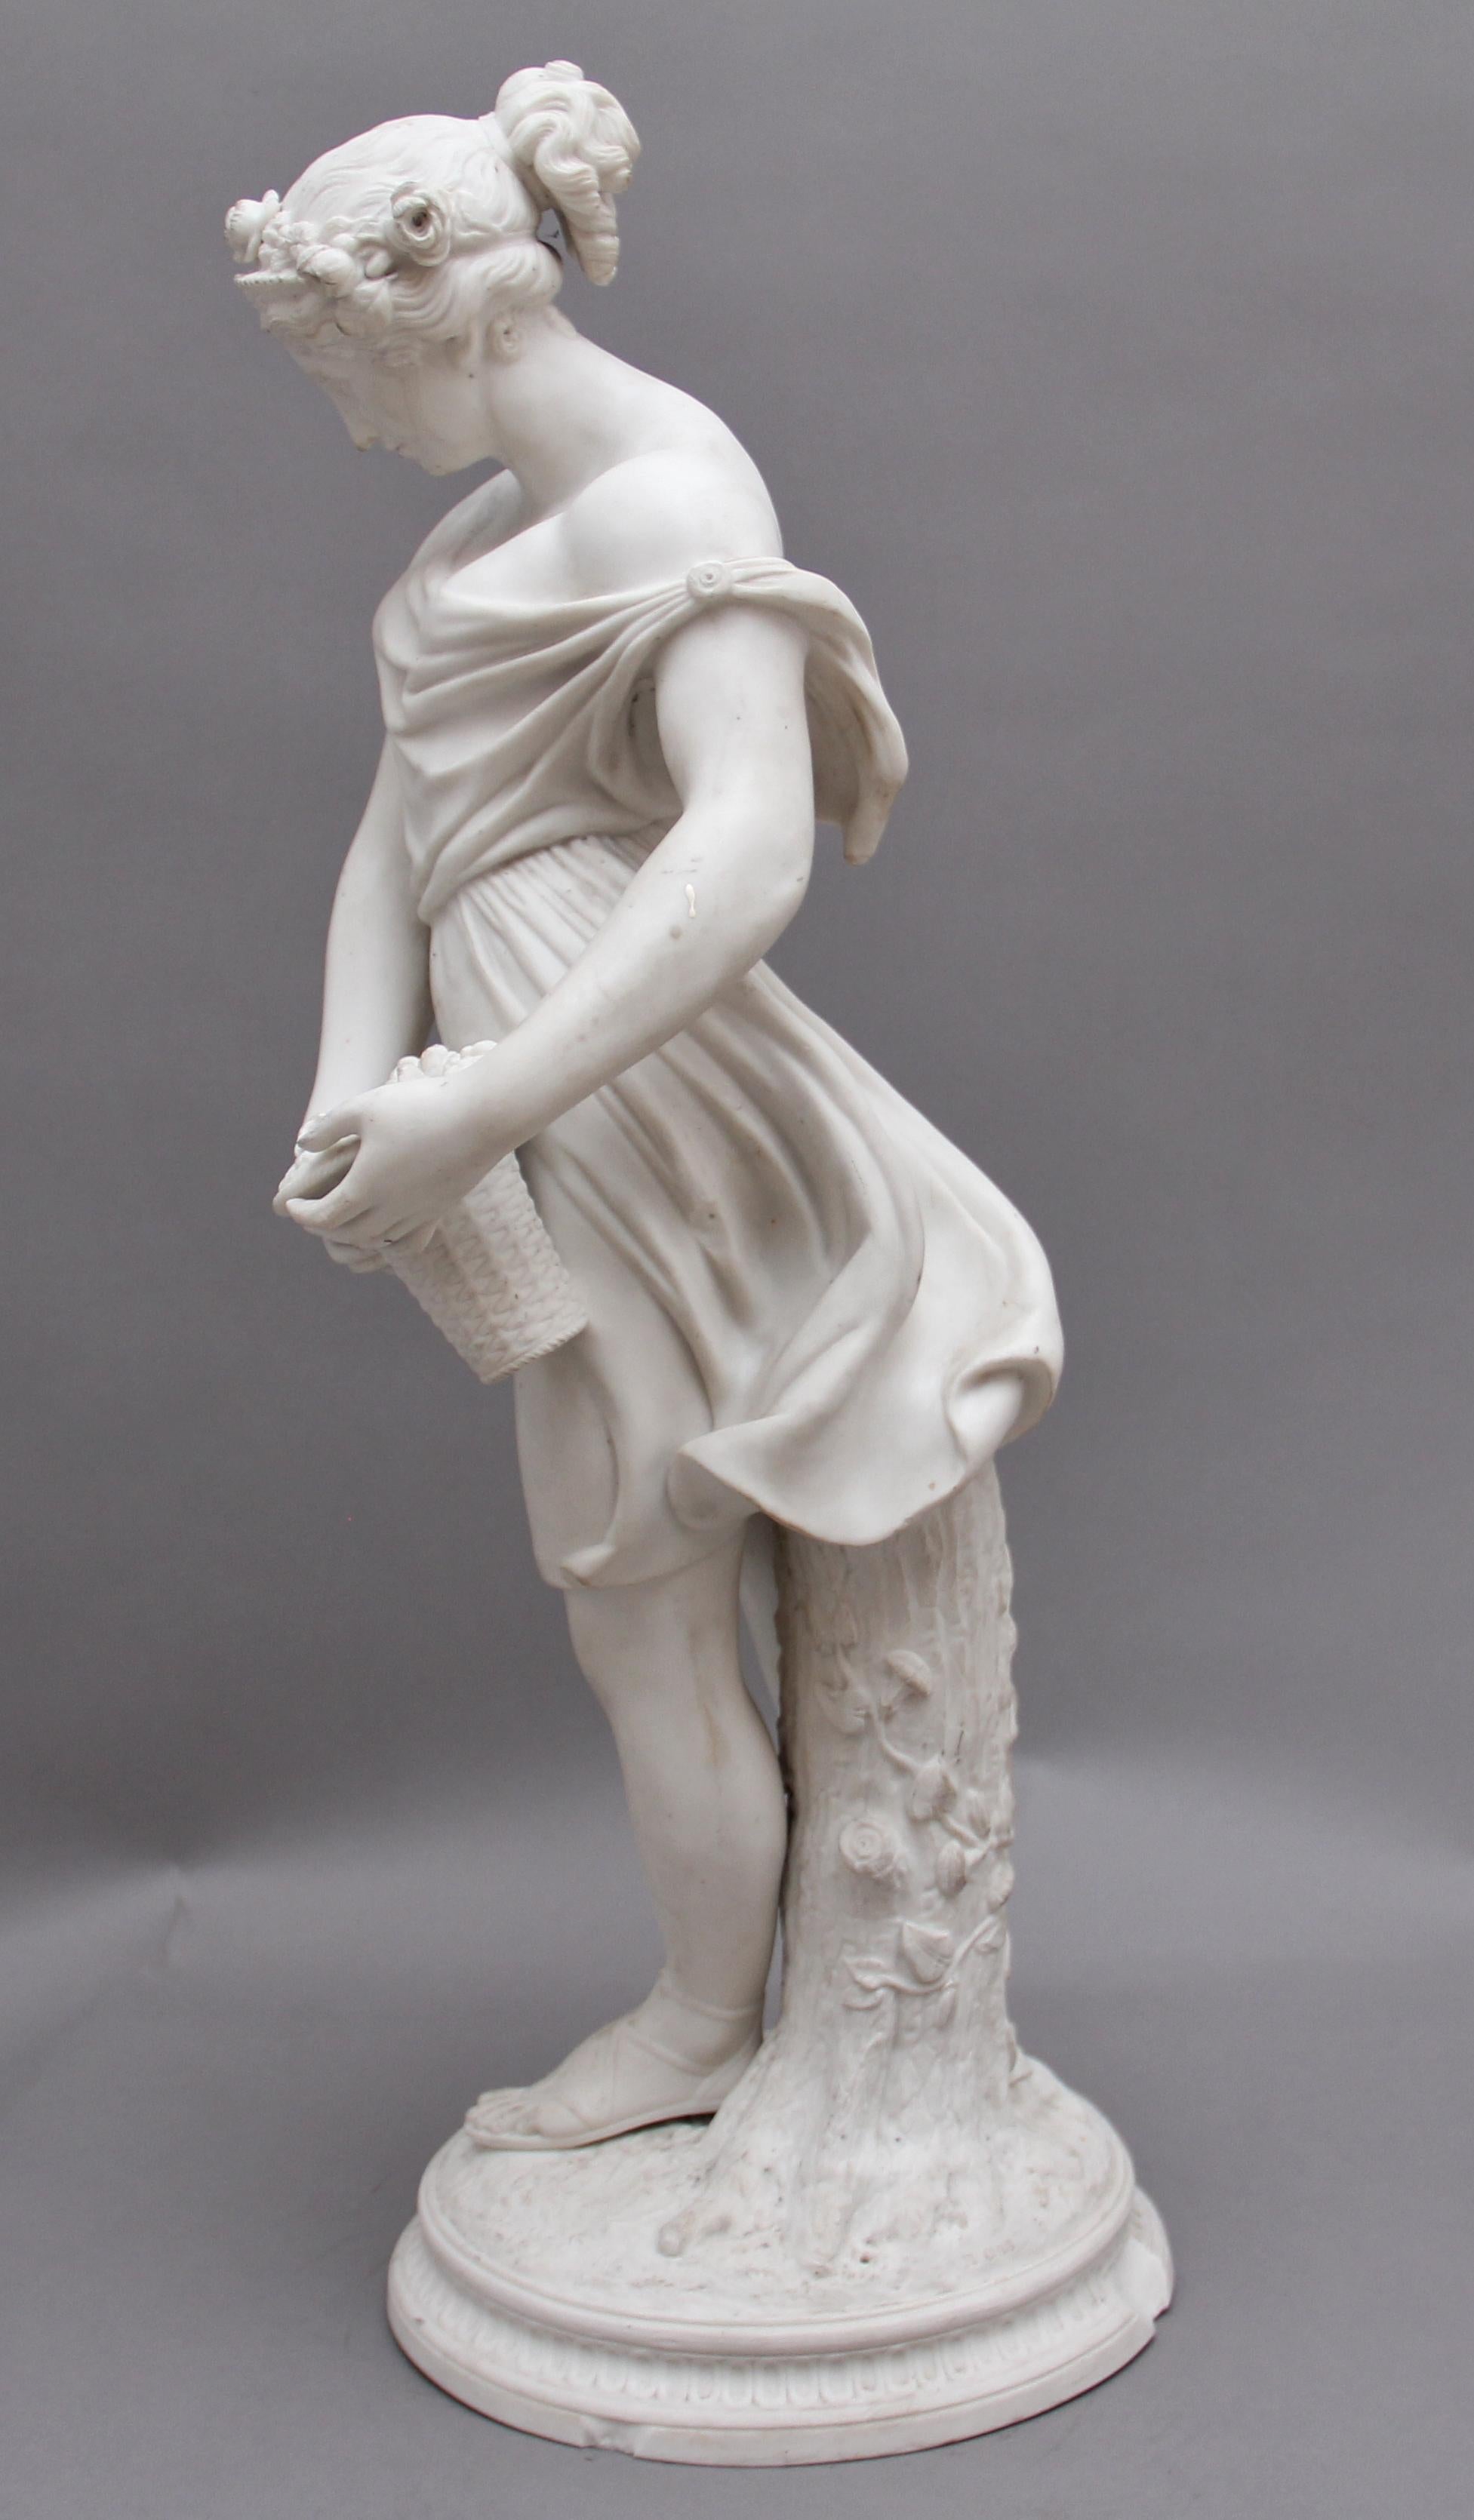 19th century parian figure of a flower maiden, the lady holding a basket of flowers and leaning on a floral log, wonderful detail all around. The base has some damage in a few places.. Circa 1850.
 